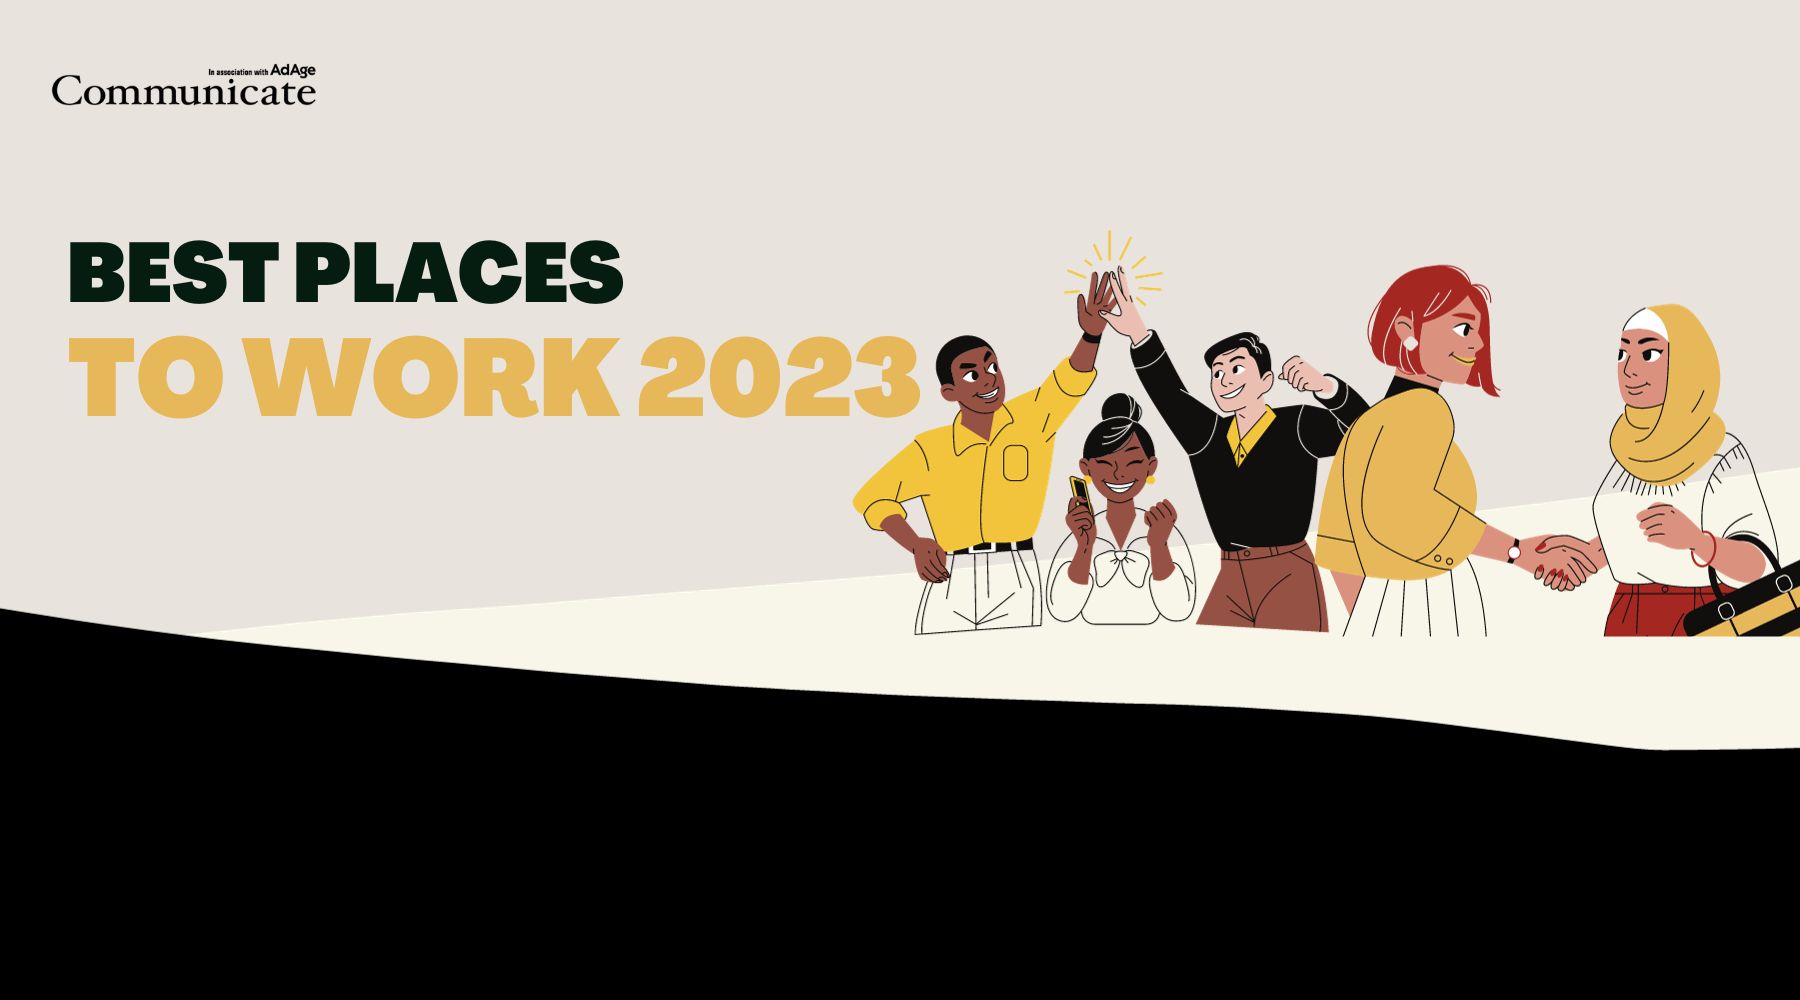 Communicate Announces ‘Best Places to Work’ for 2023